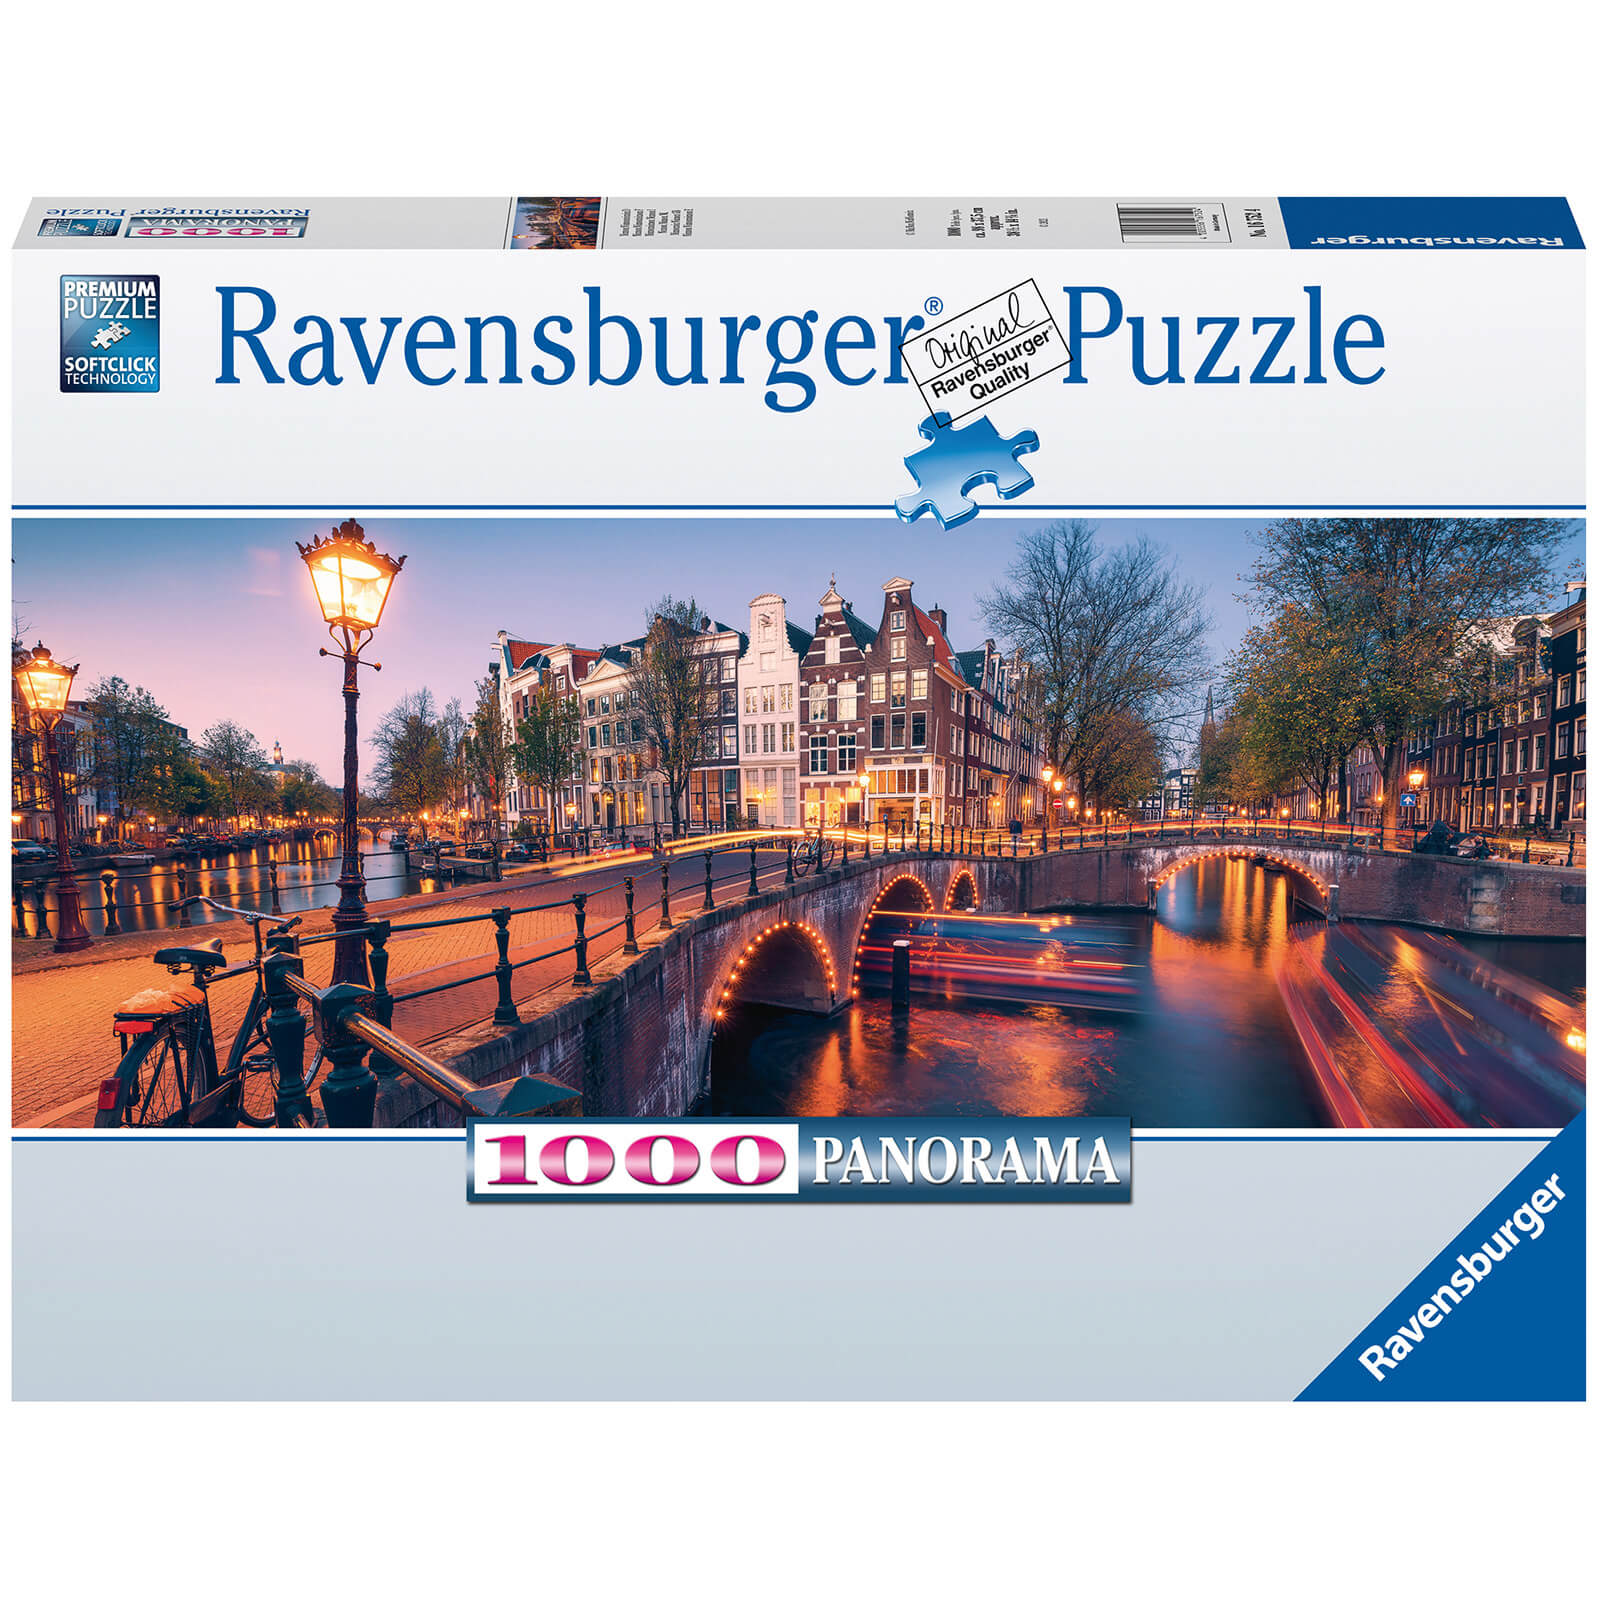 Ravensburger Evening in Amsterdam Panoramic 1000 piece Jigsaw Puzzle